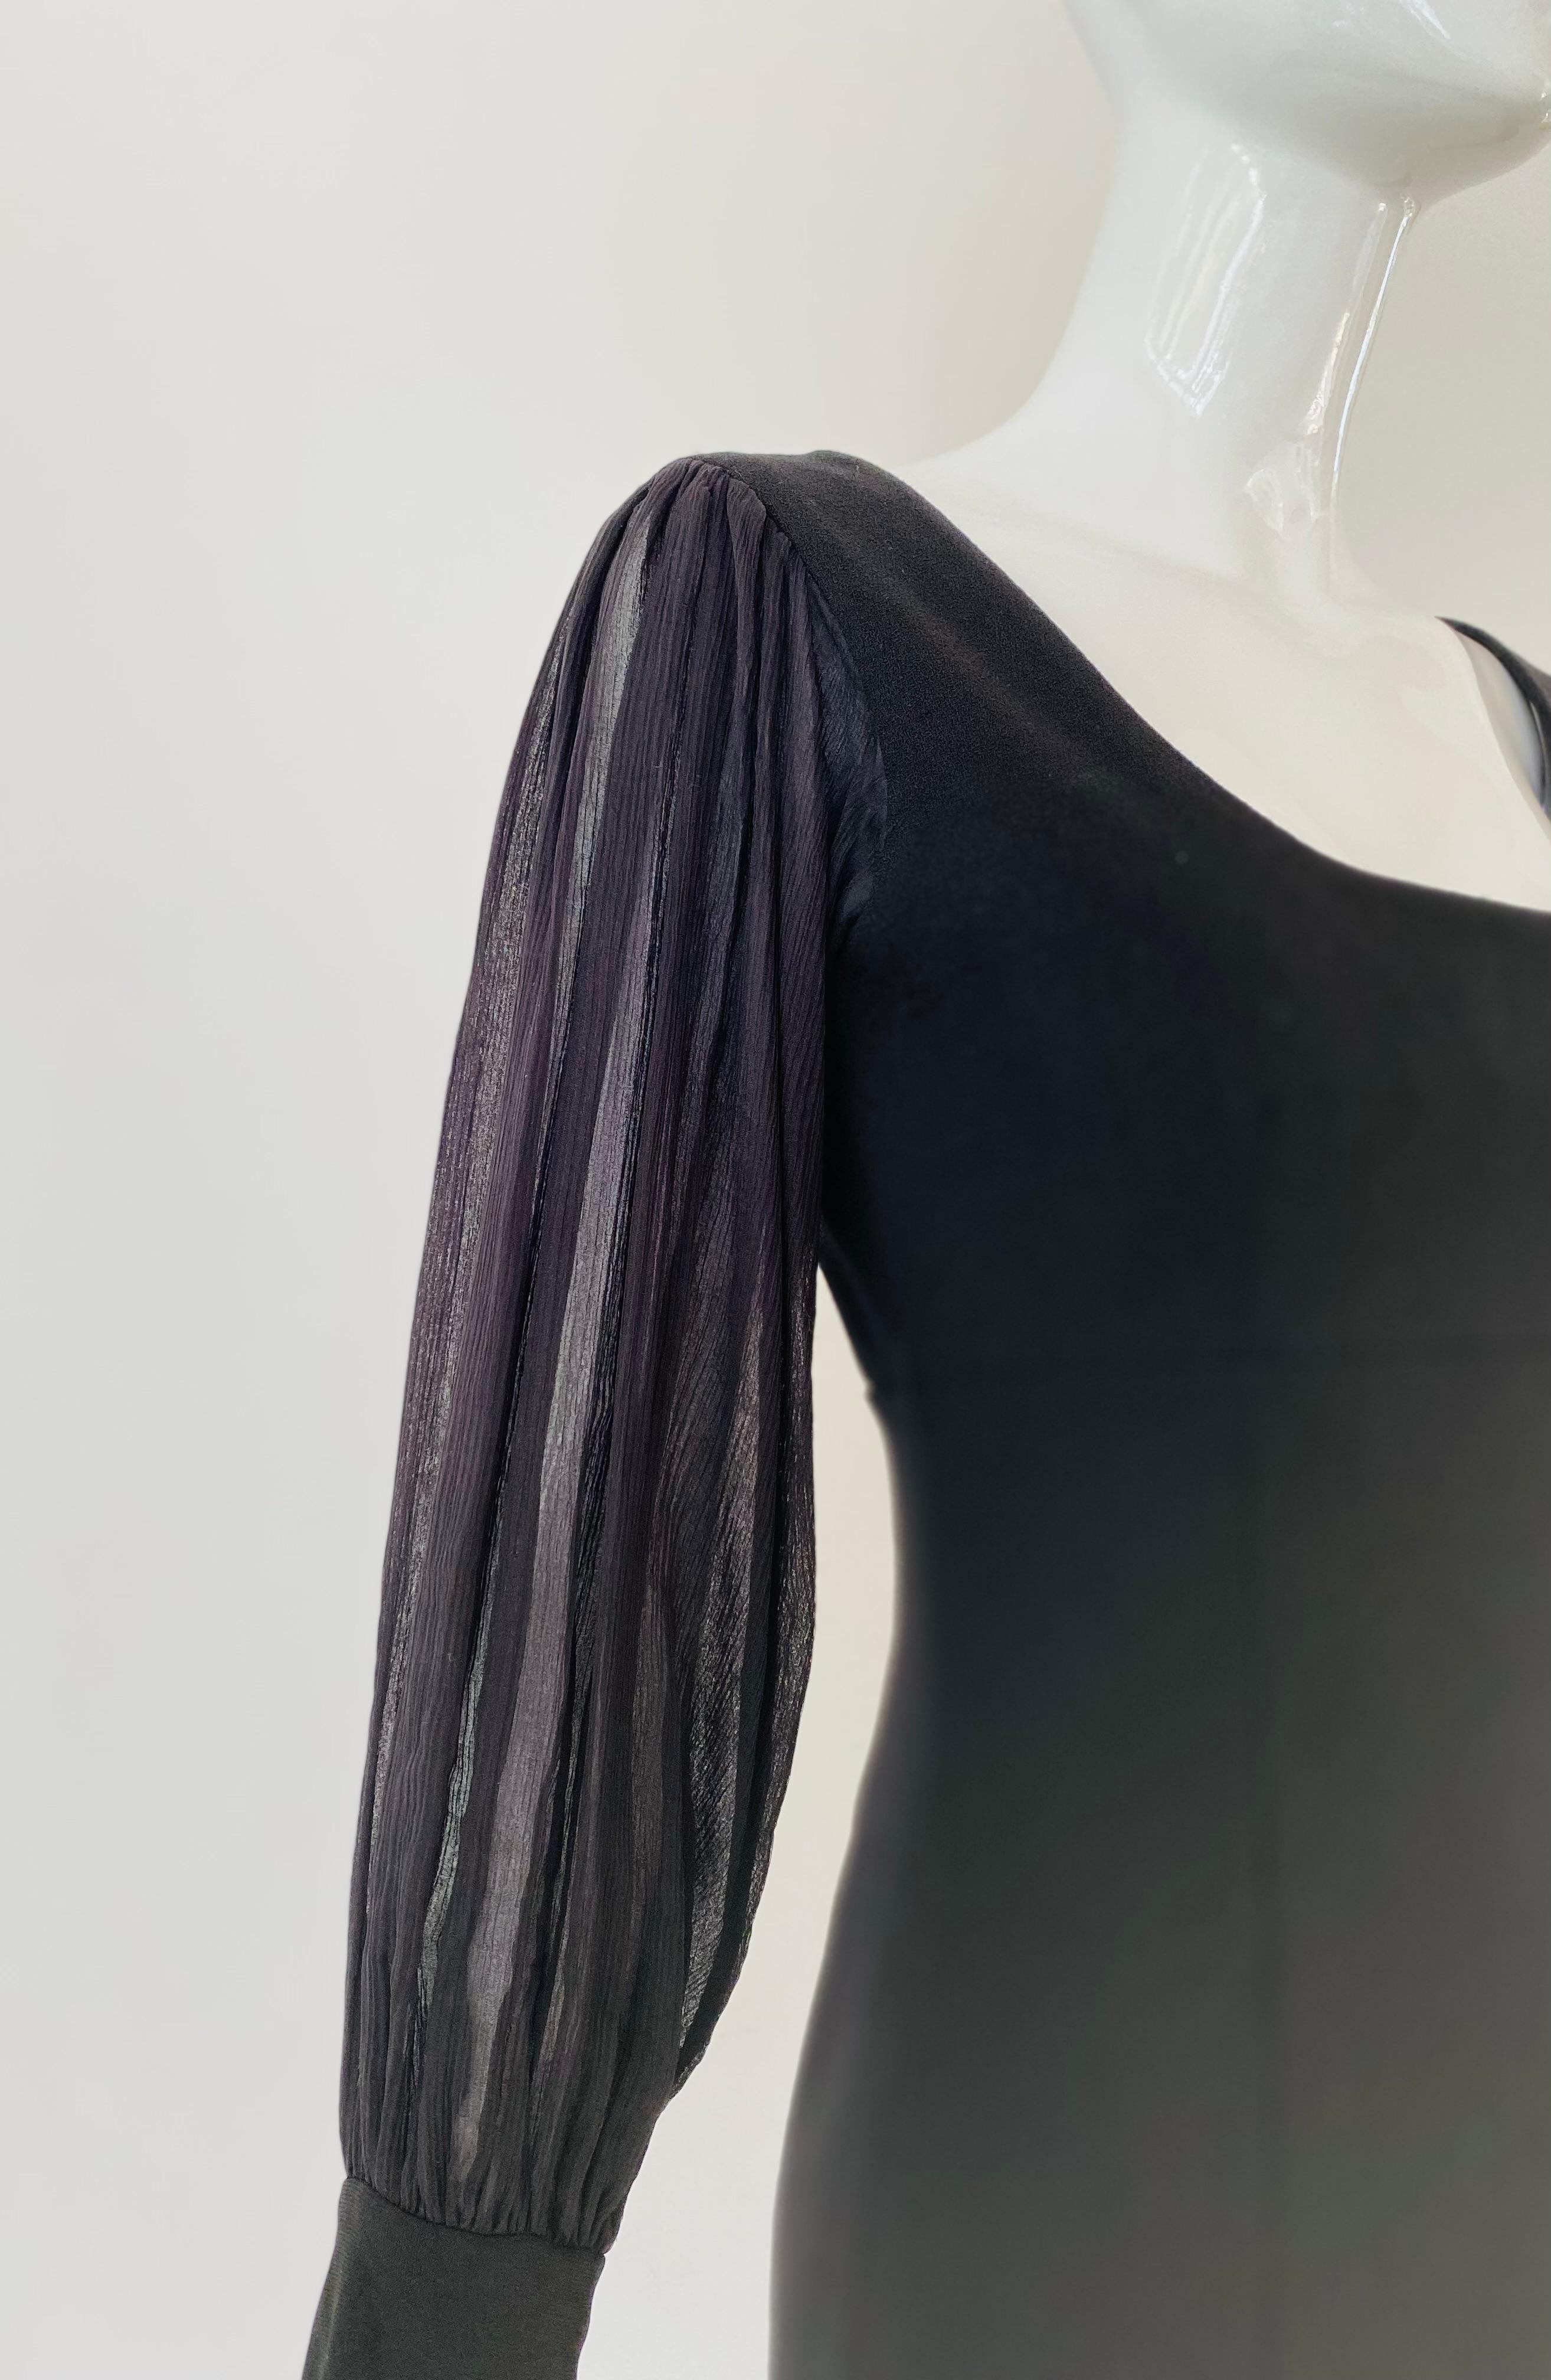 2000s Little black dress by Gianfranco Ferre. The hem falls right above the knee and has beautiful sheer ballon long sleeves. It has a scoop neck and a little sheer fabric on the back between the scoop neck and the rest of the dress, connecting the